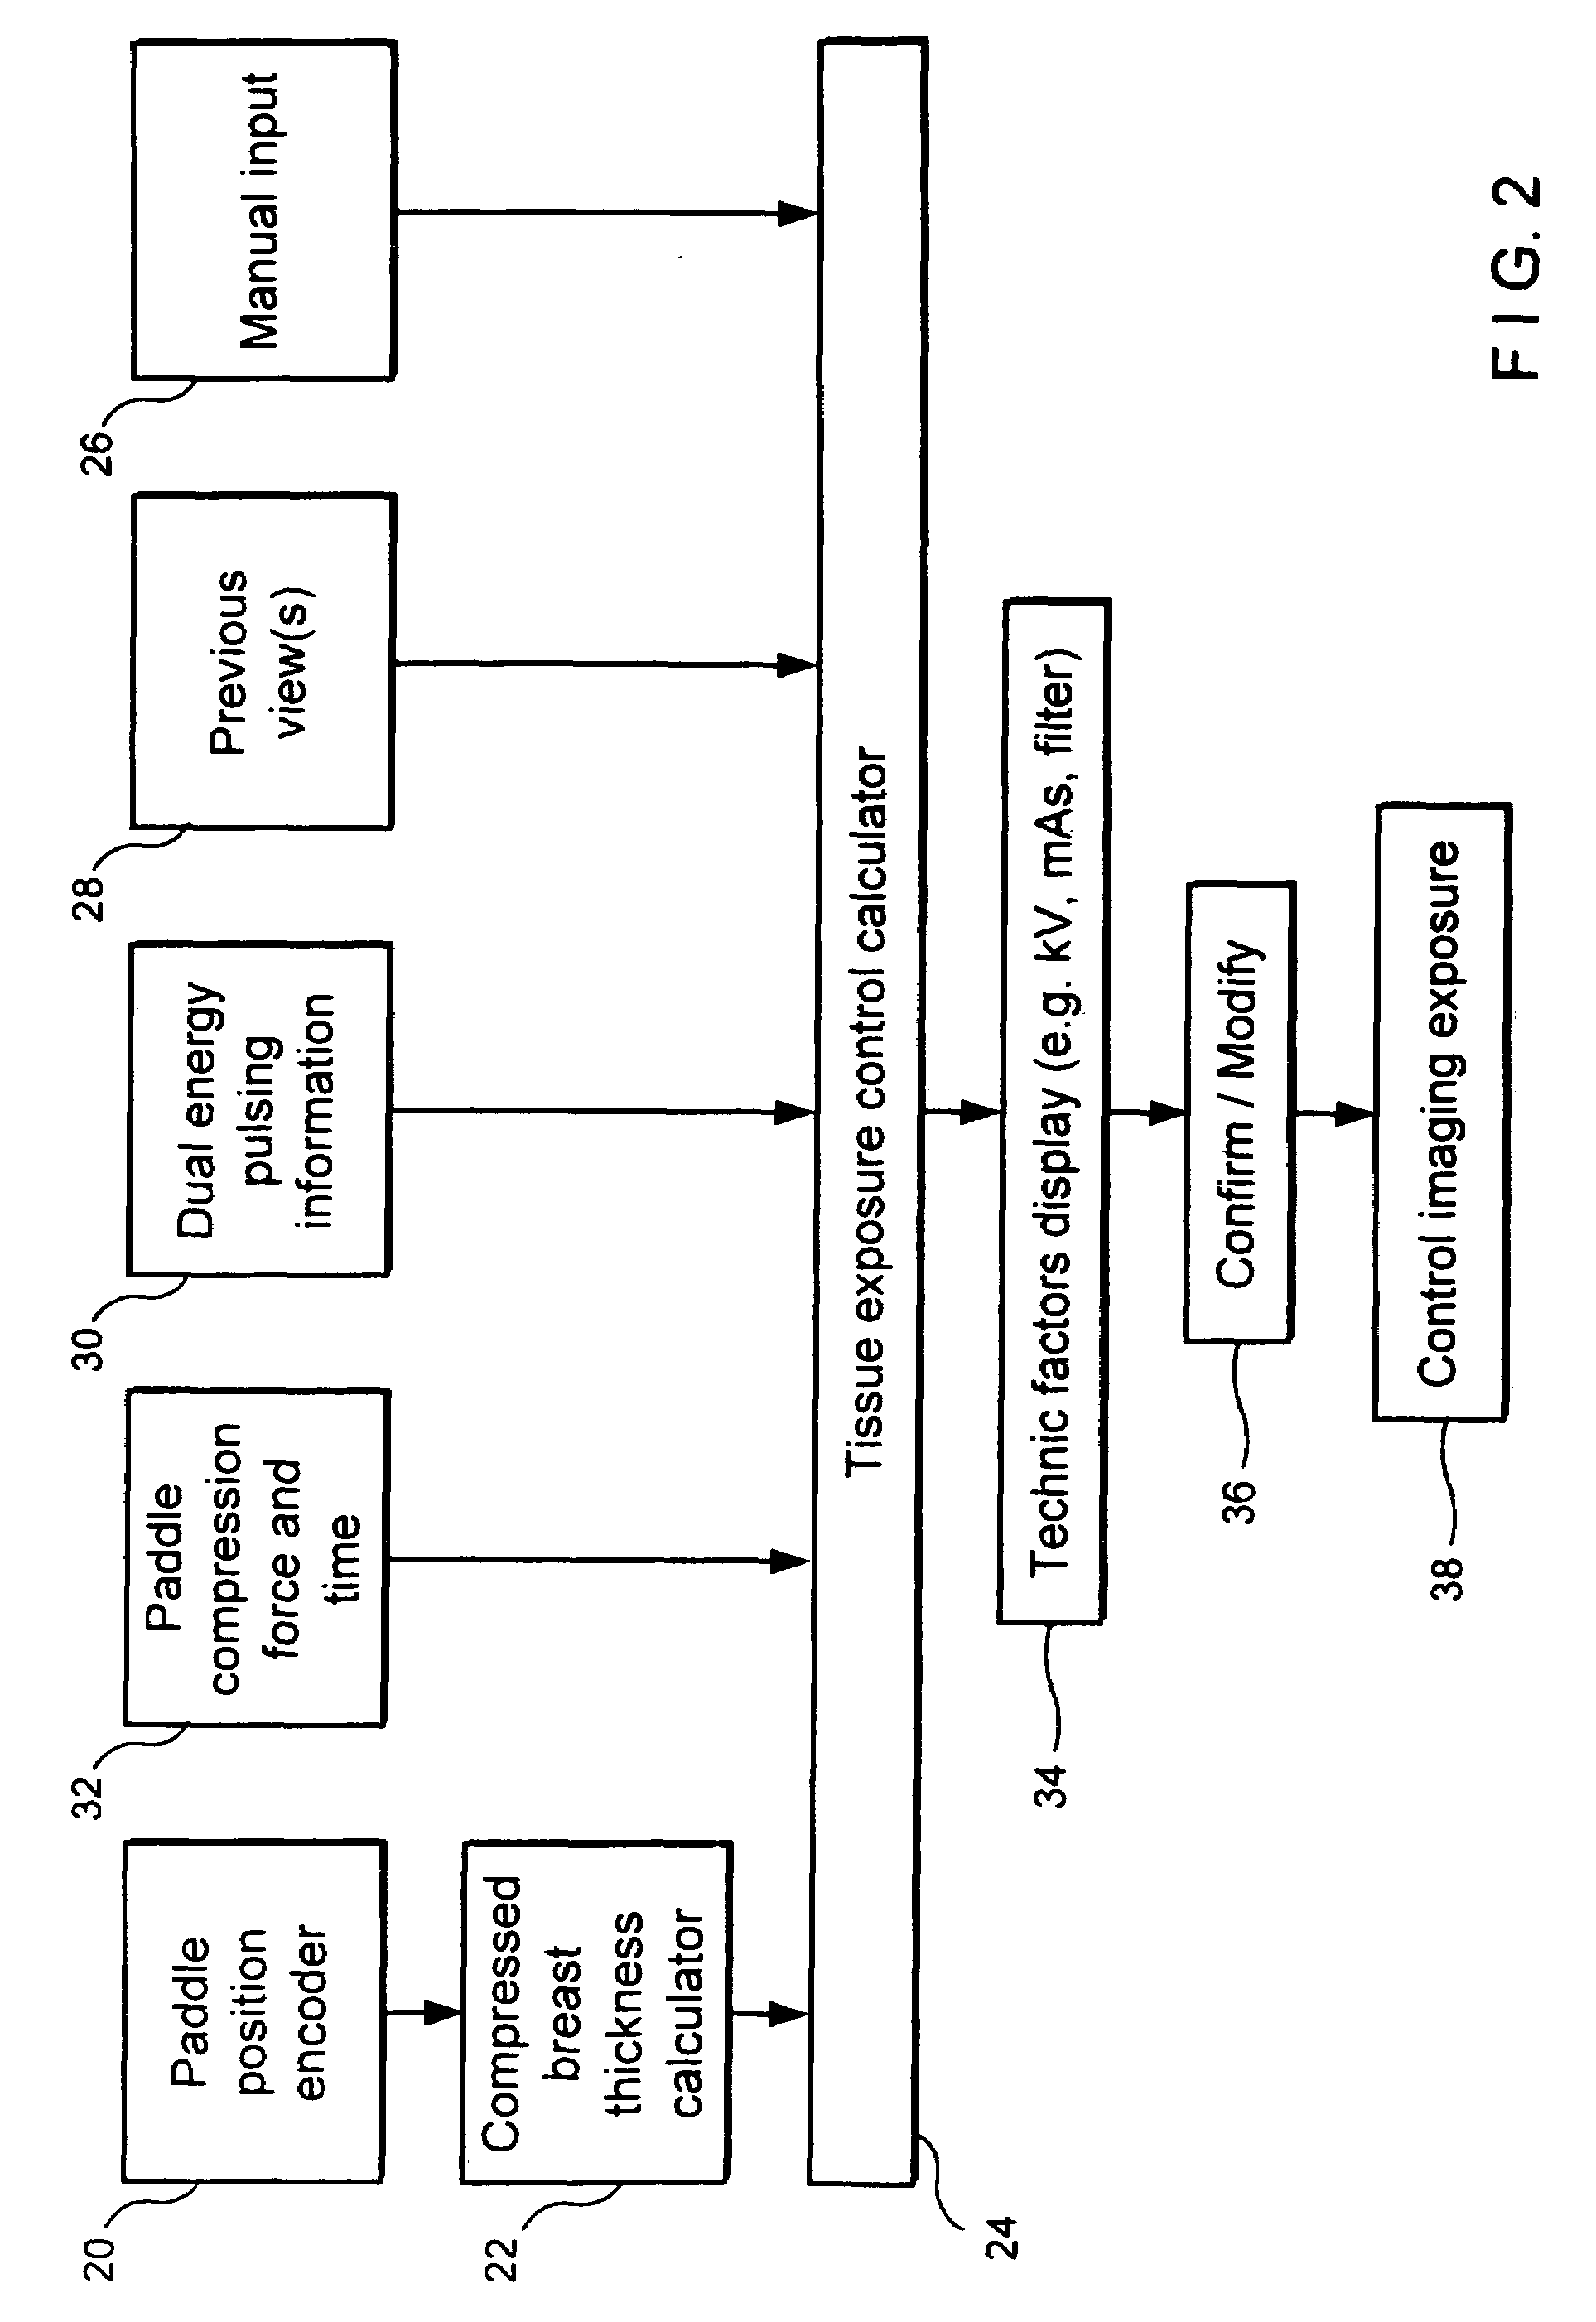 Full field mammography with tissue exposure control, tomosynthesis, and dynamic field of view processing